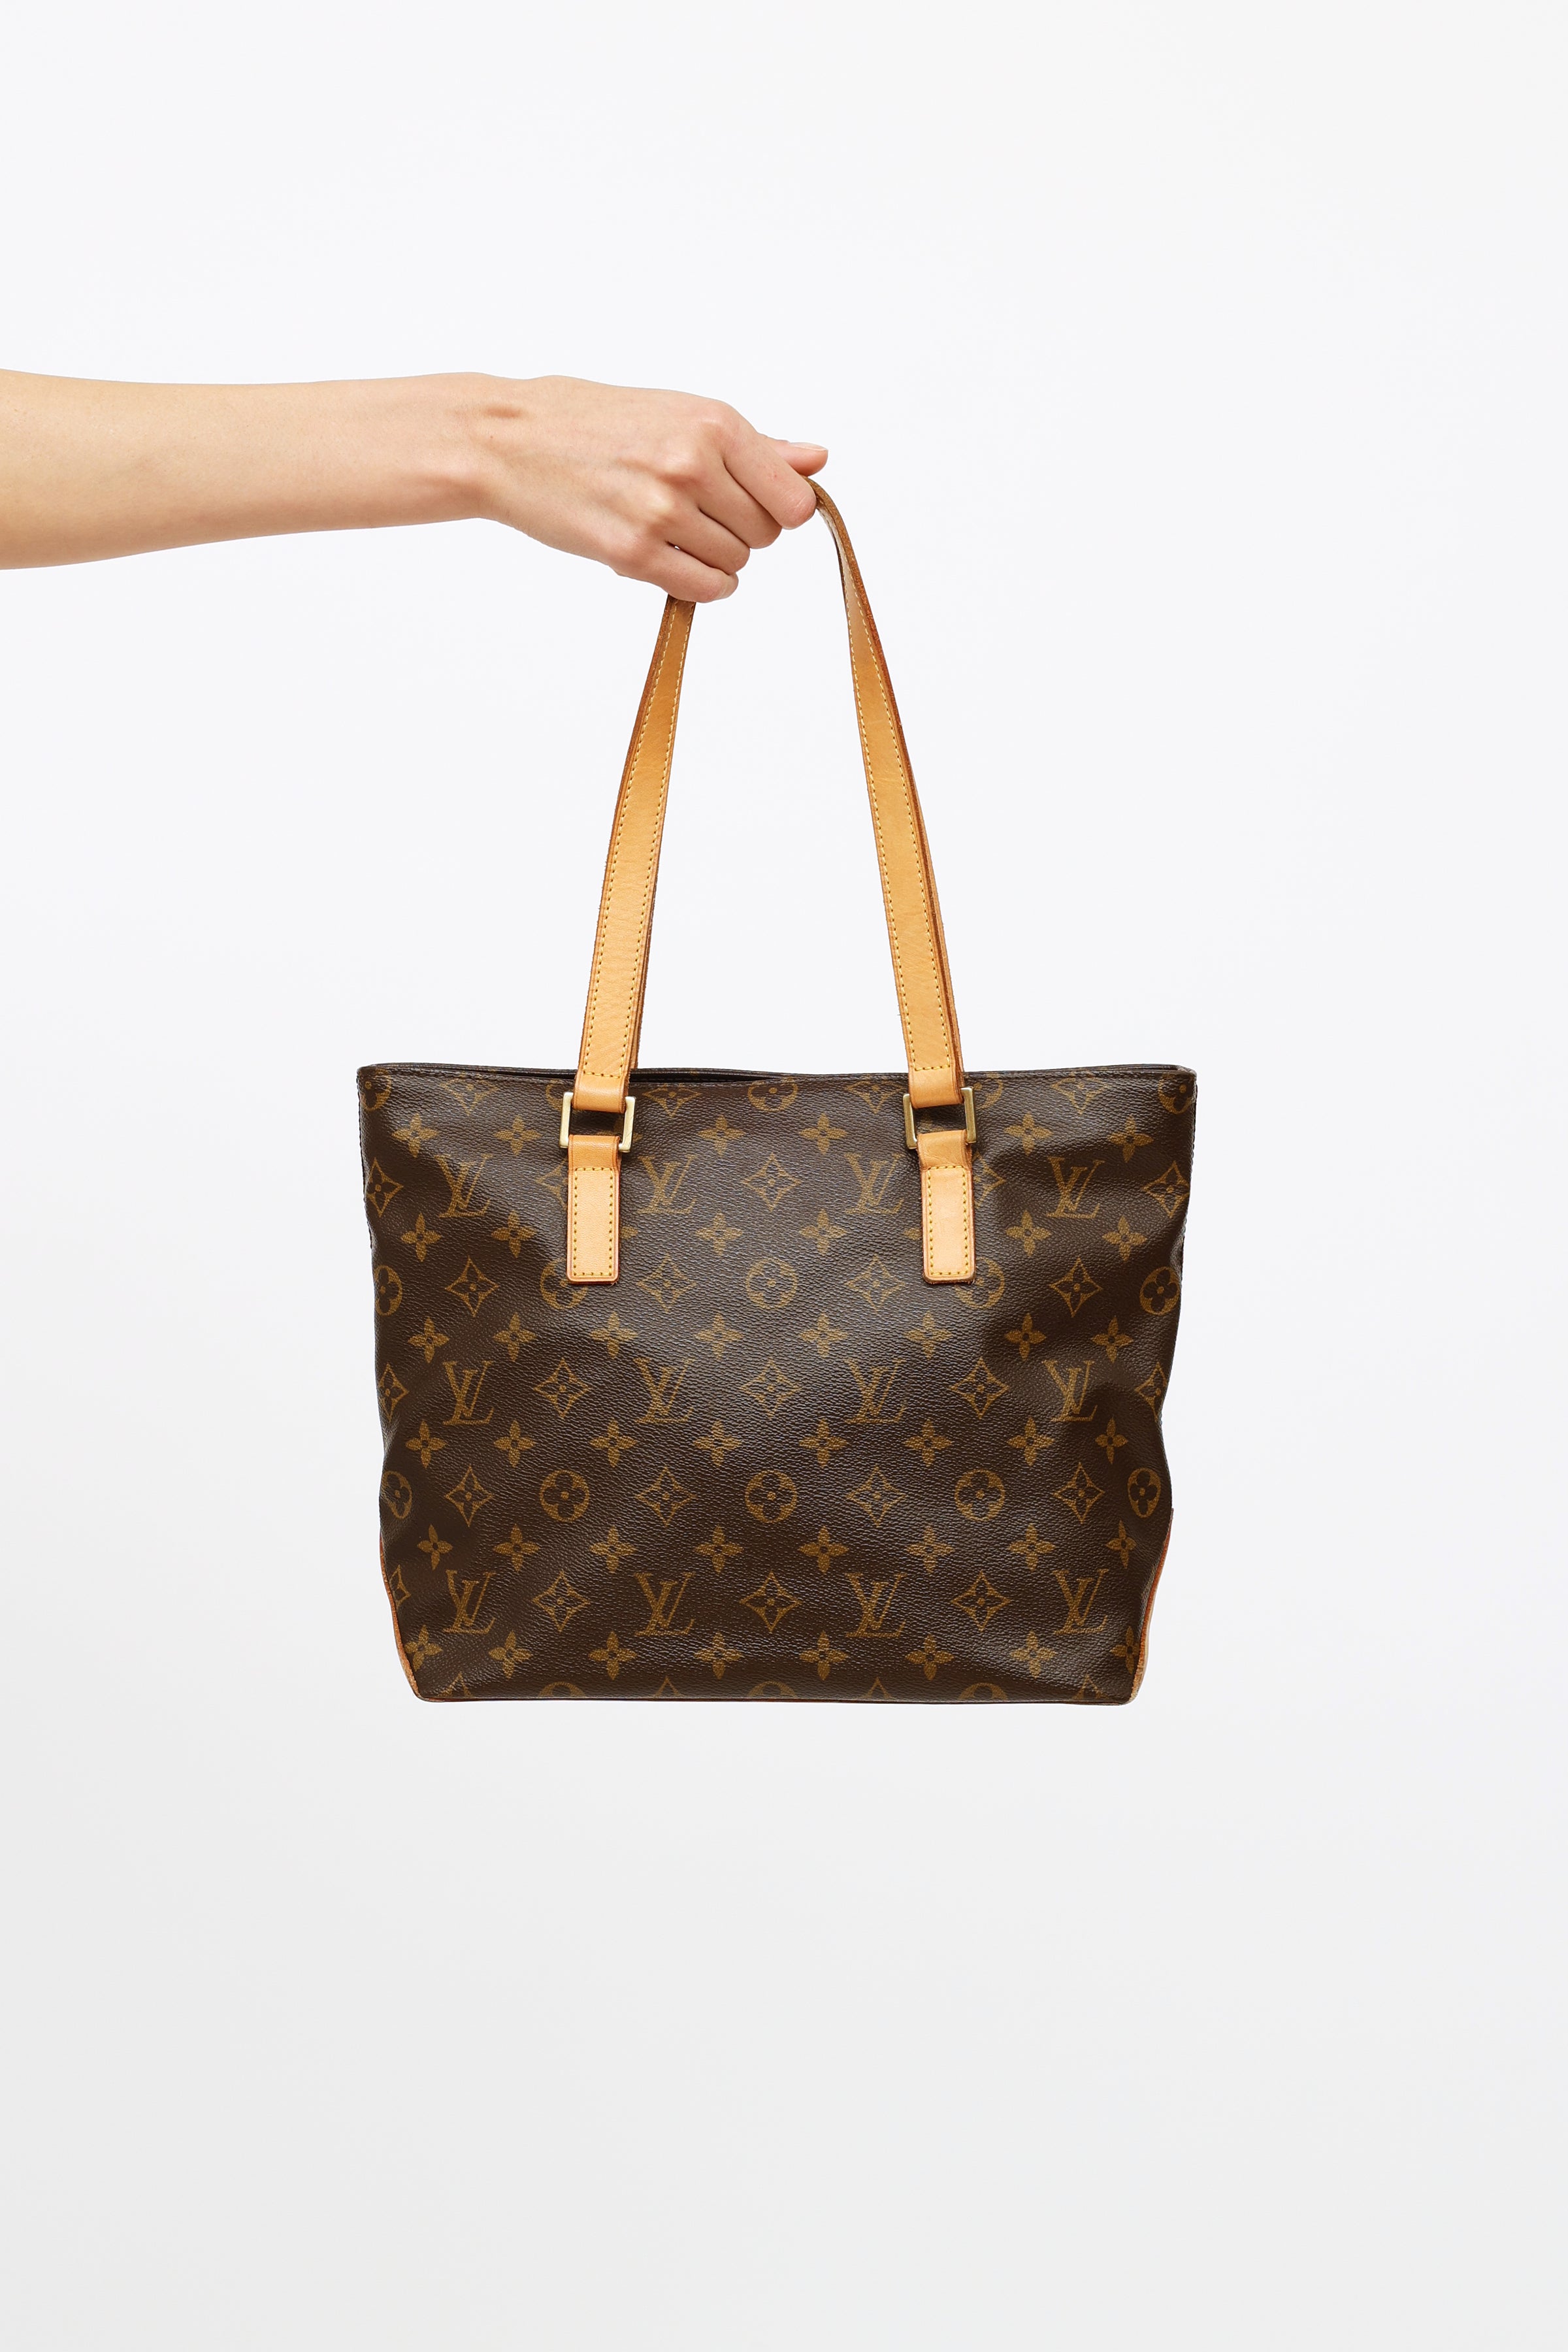 The Louis Vuitton Cabas Puano is the perfect bag to het get yiu in the, louisvuitton